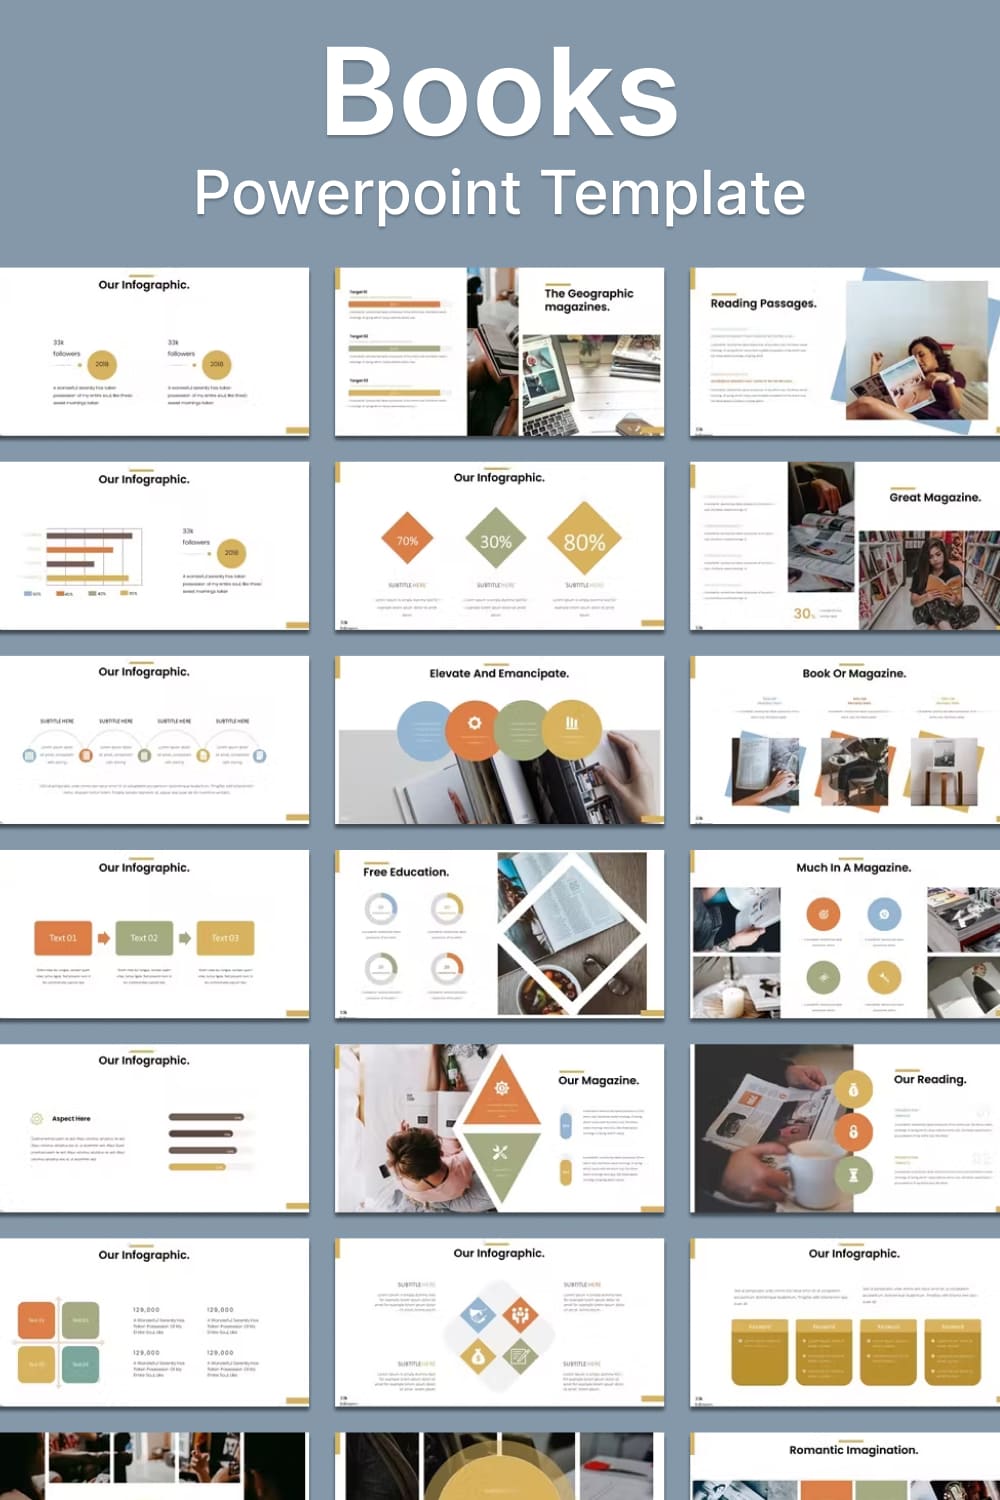 Books powerpoint template - pinterest image preview.